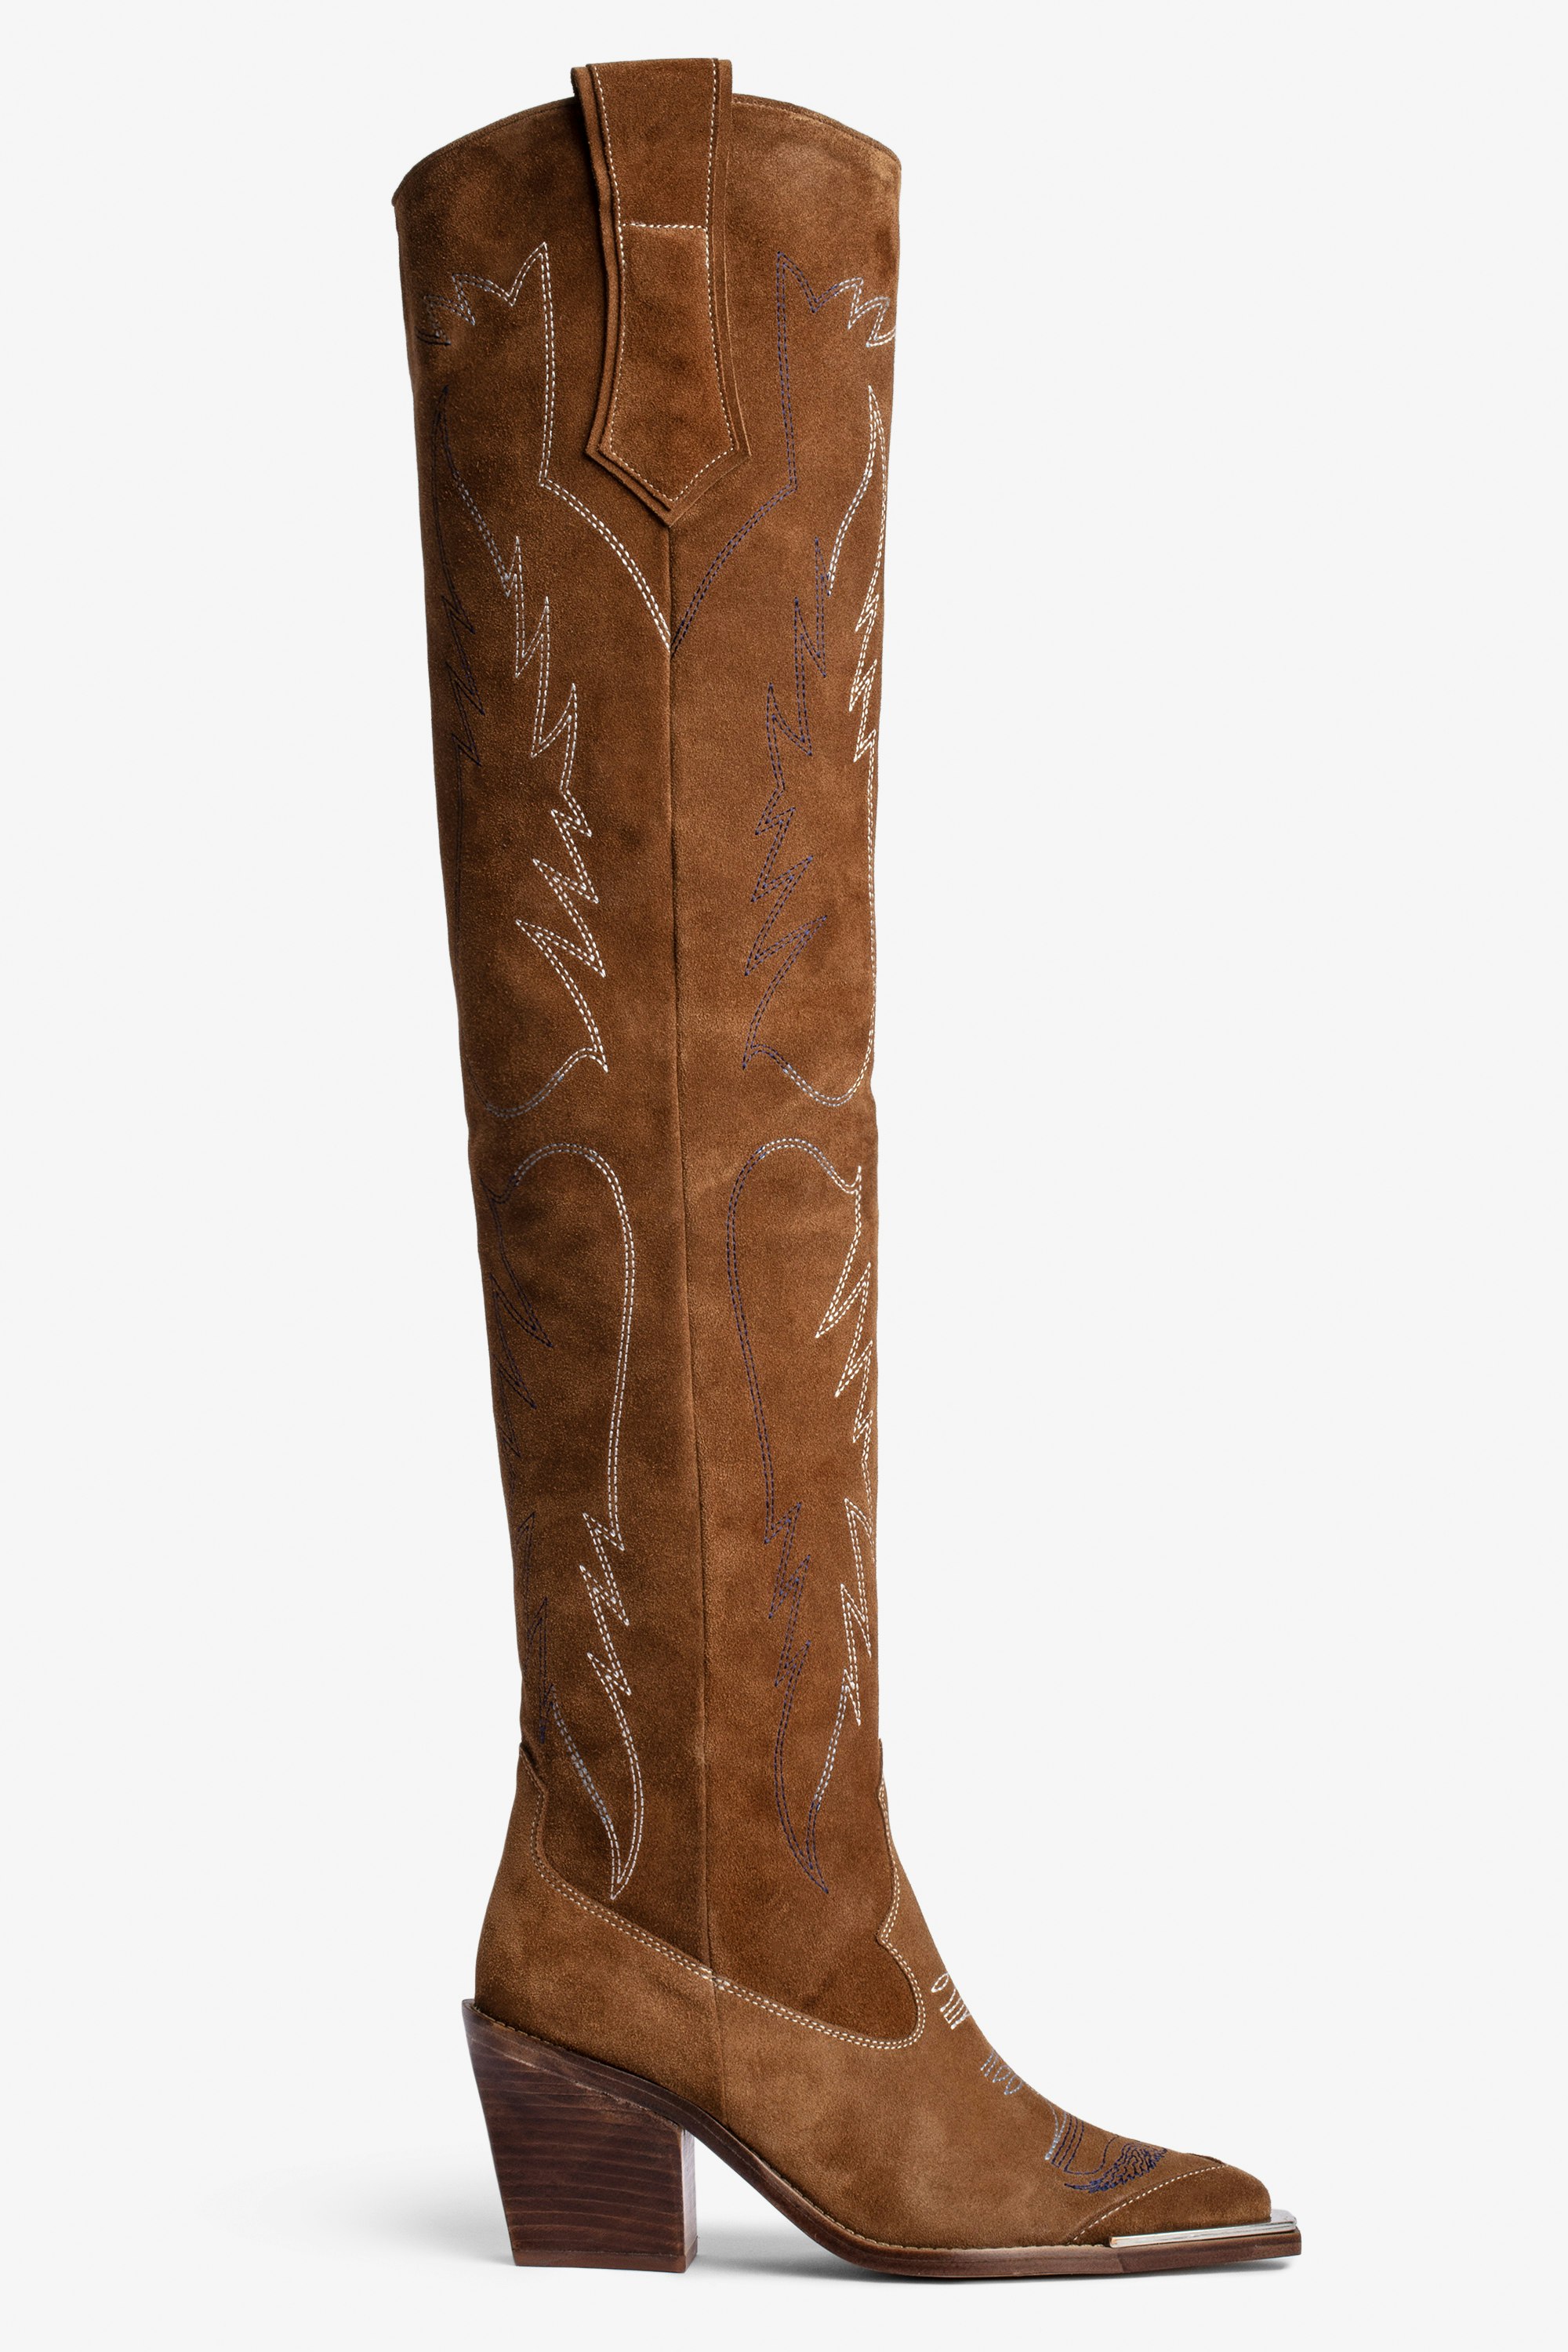 Cara High Boots Leather Women's cognac suede high boots. Buying this product, you support a responsible leather production through Leather Working Group.